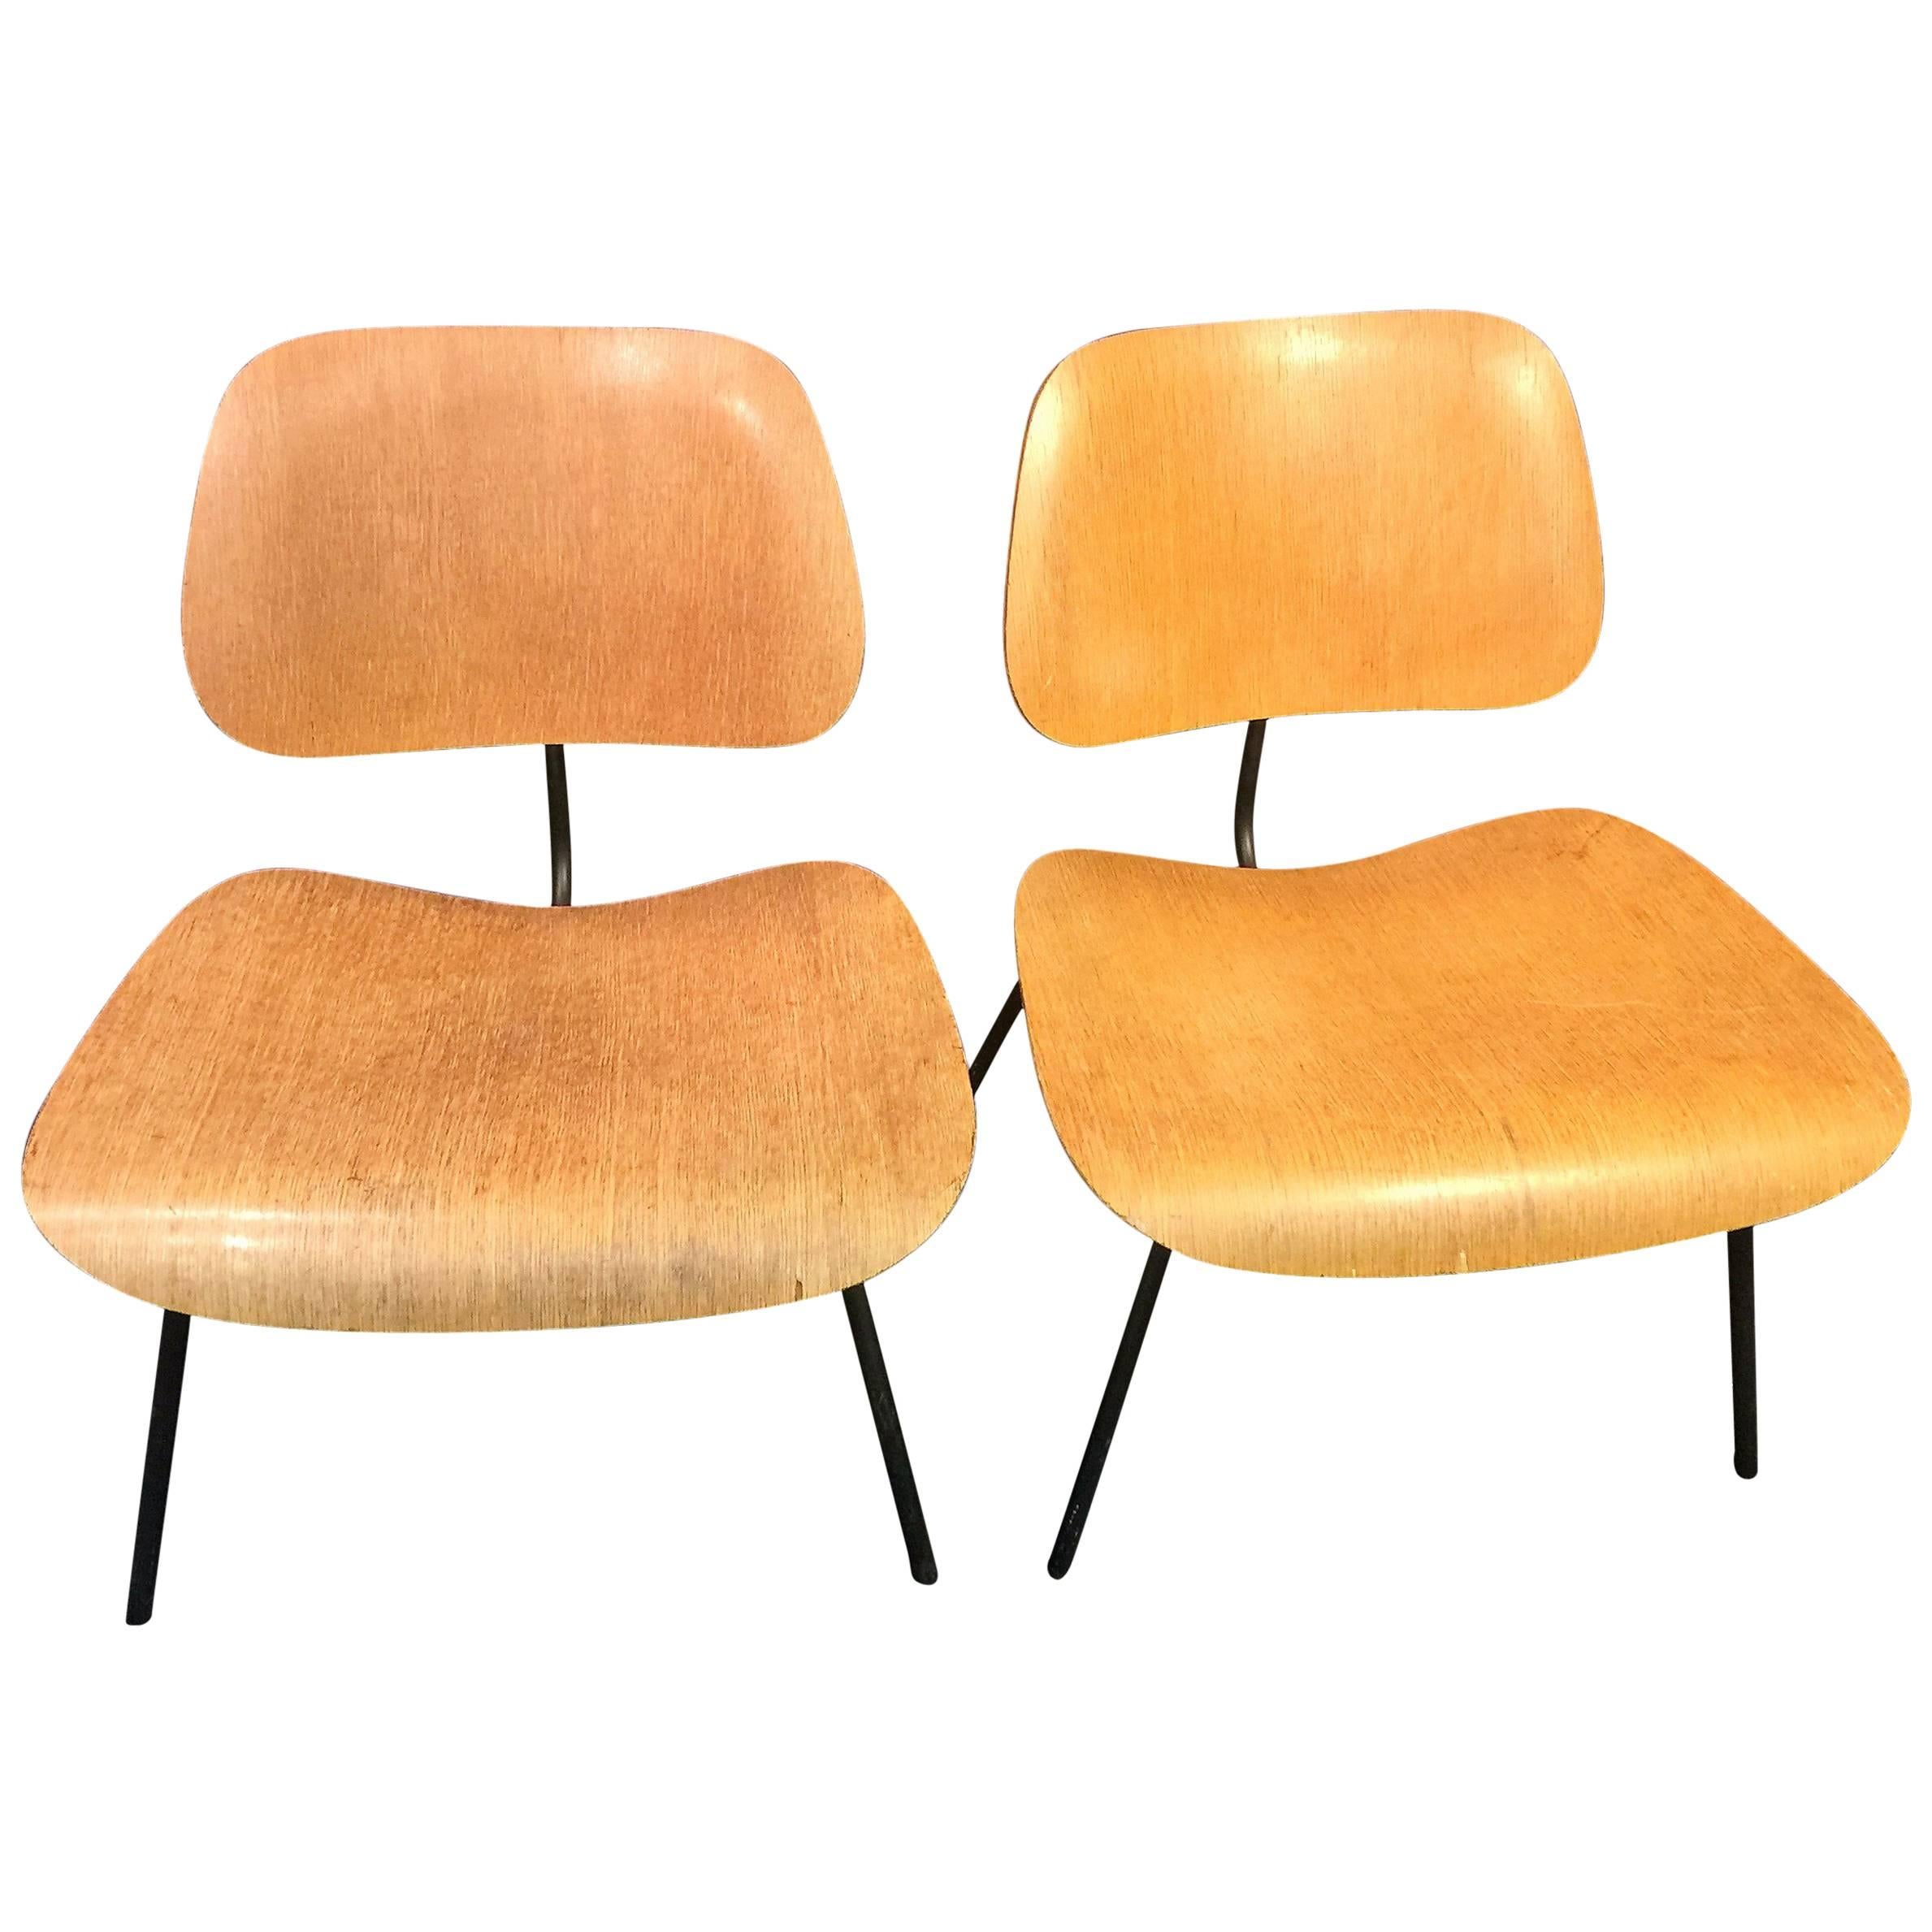 Pair of Early Charles Eames LCM Chairs For Sale